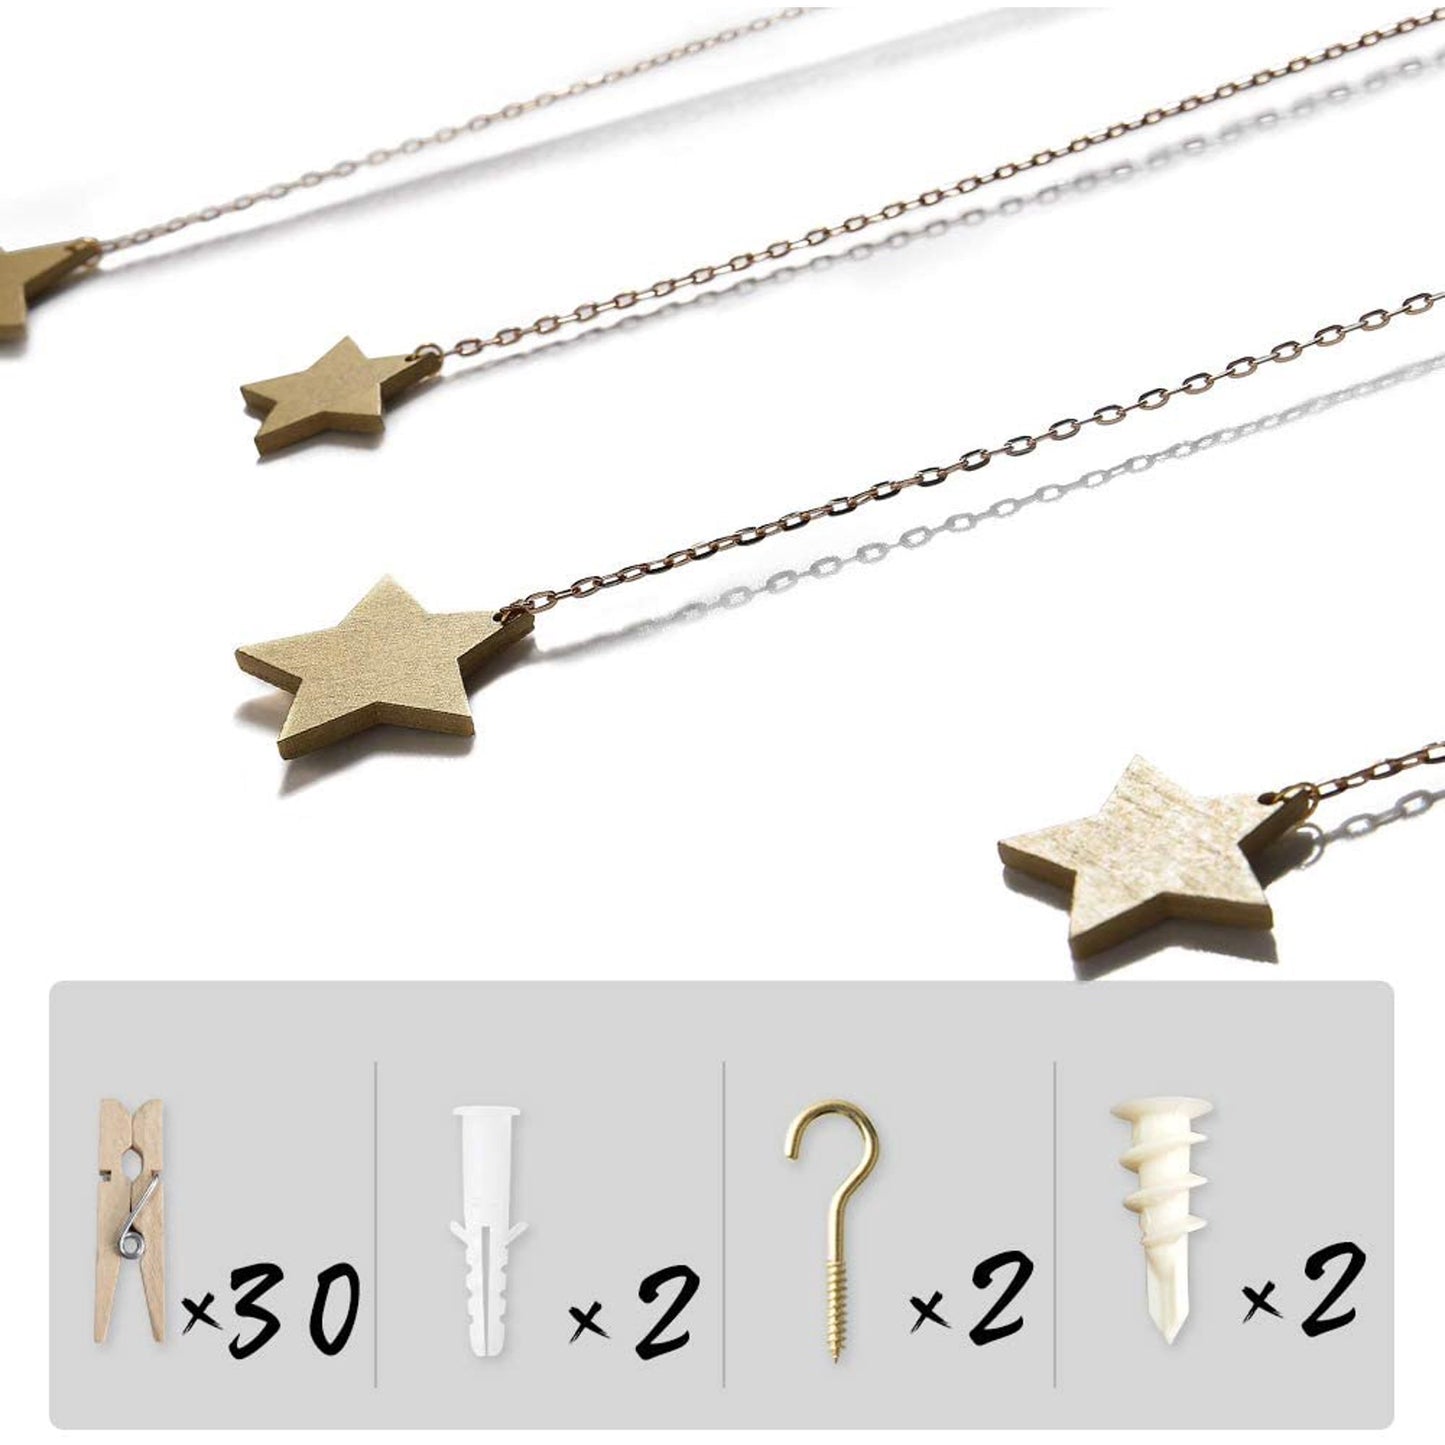 Photo Display Wood Stars Garland Chains for Dorm Decor ,Hanging Picture Frame Collage with 30 Wood Clips, Wall Art Decoration for Home Office Nursery Room Dorm Living Room Bedroom